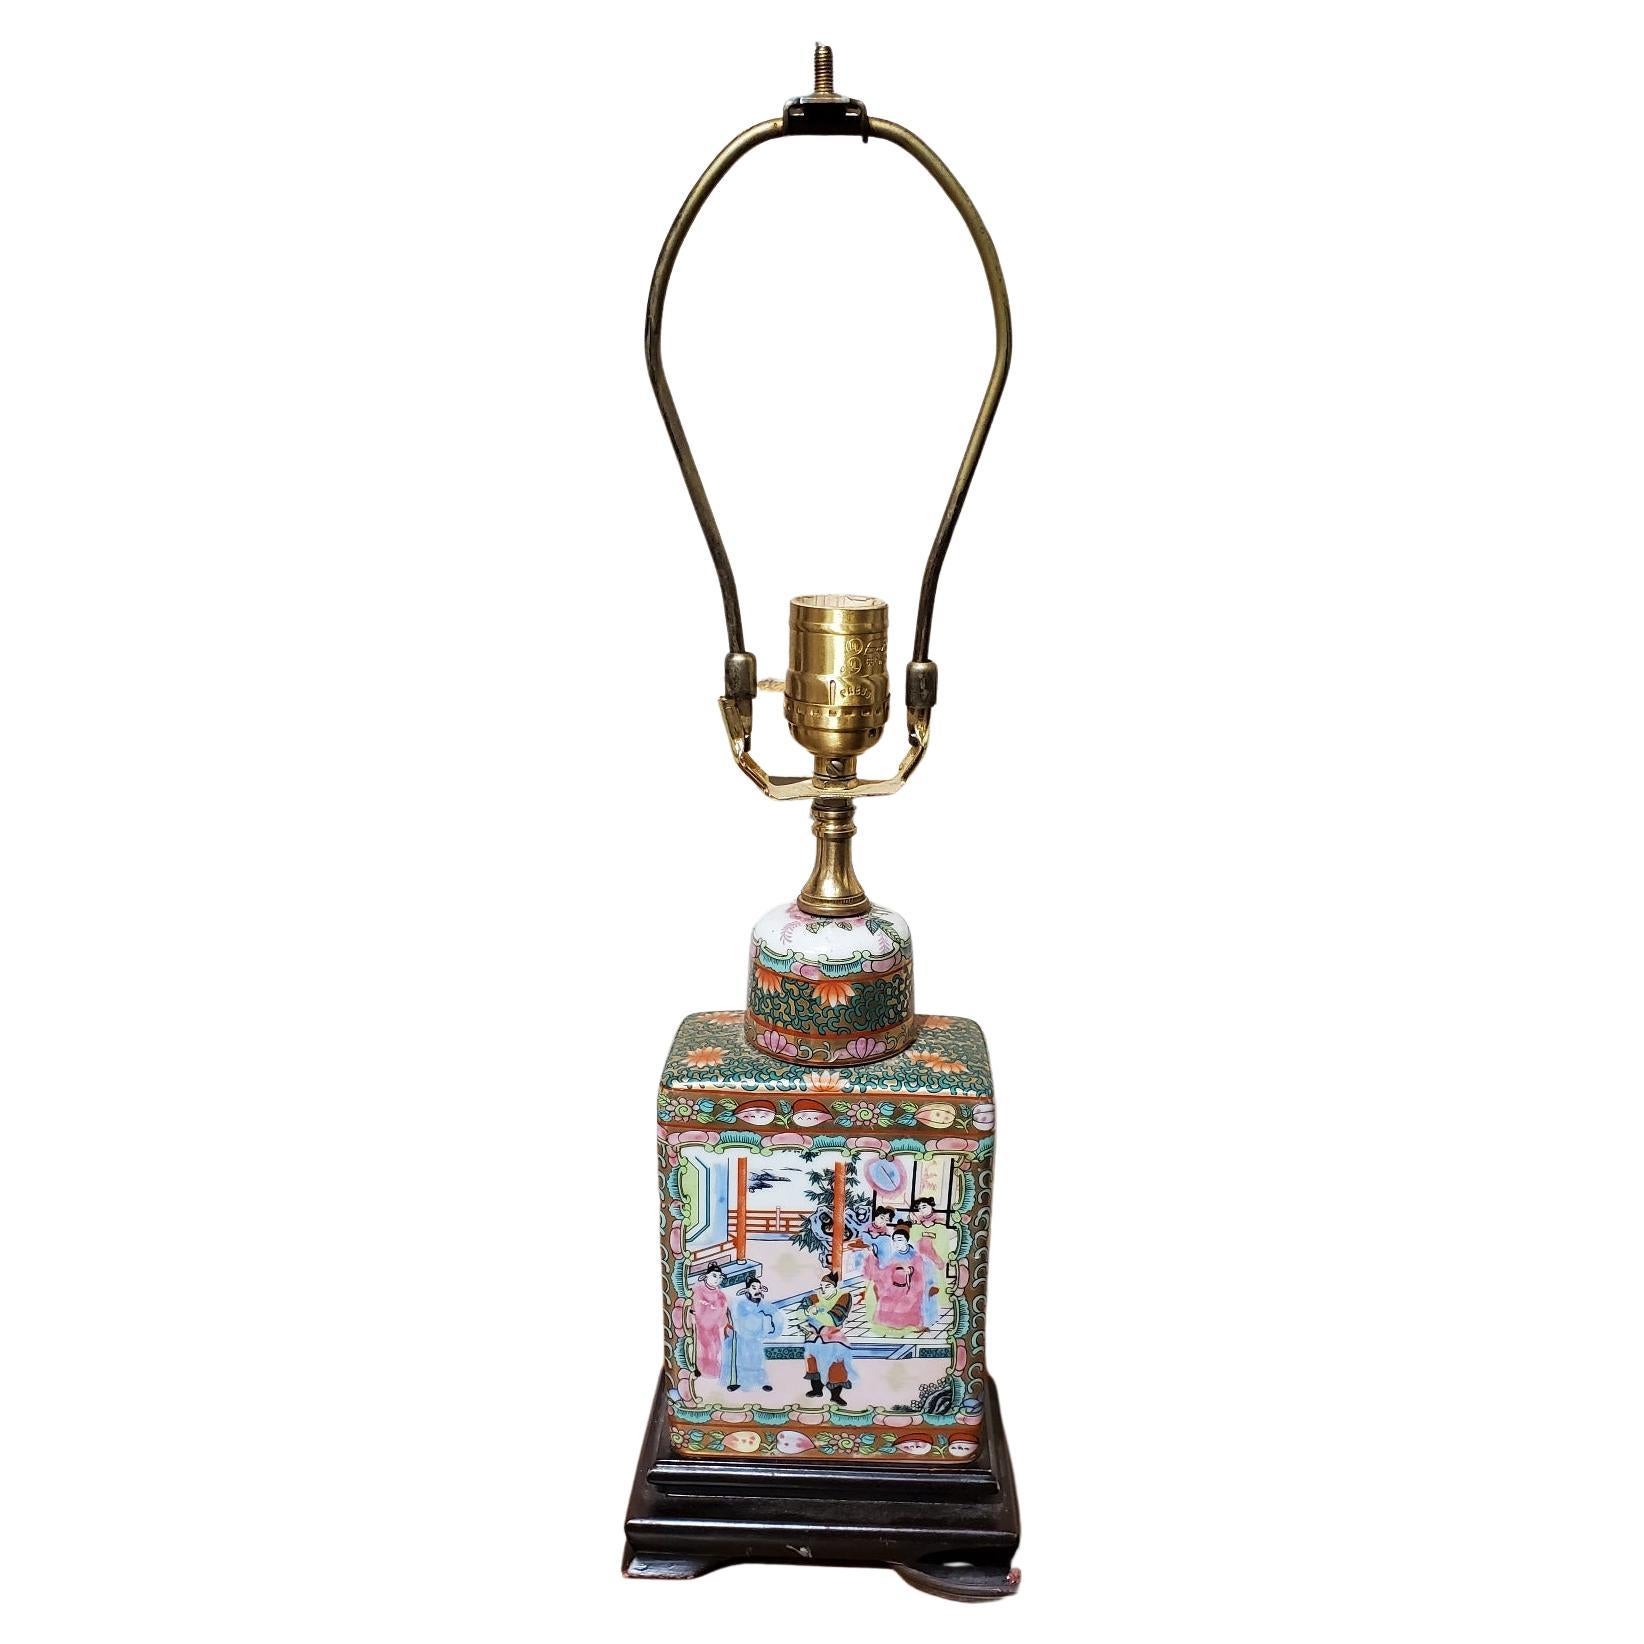 Small 19th Century Chinese Export Urn Converted to a Modern Lamp